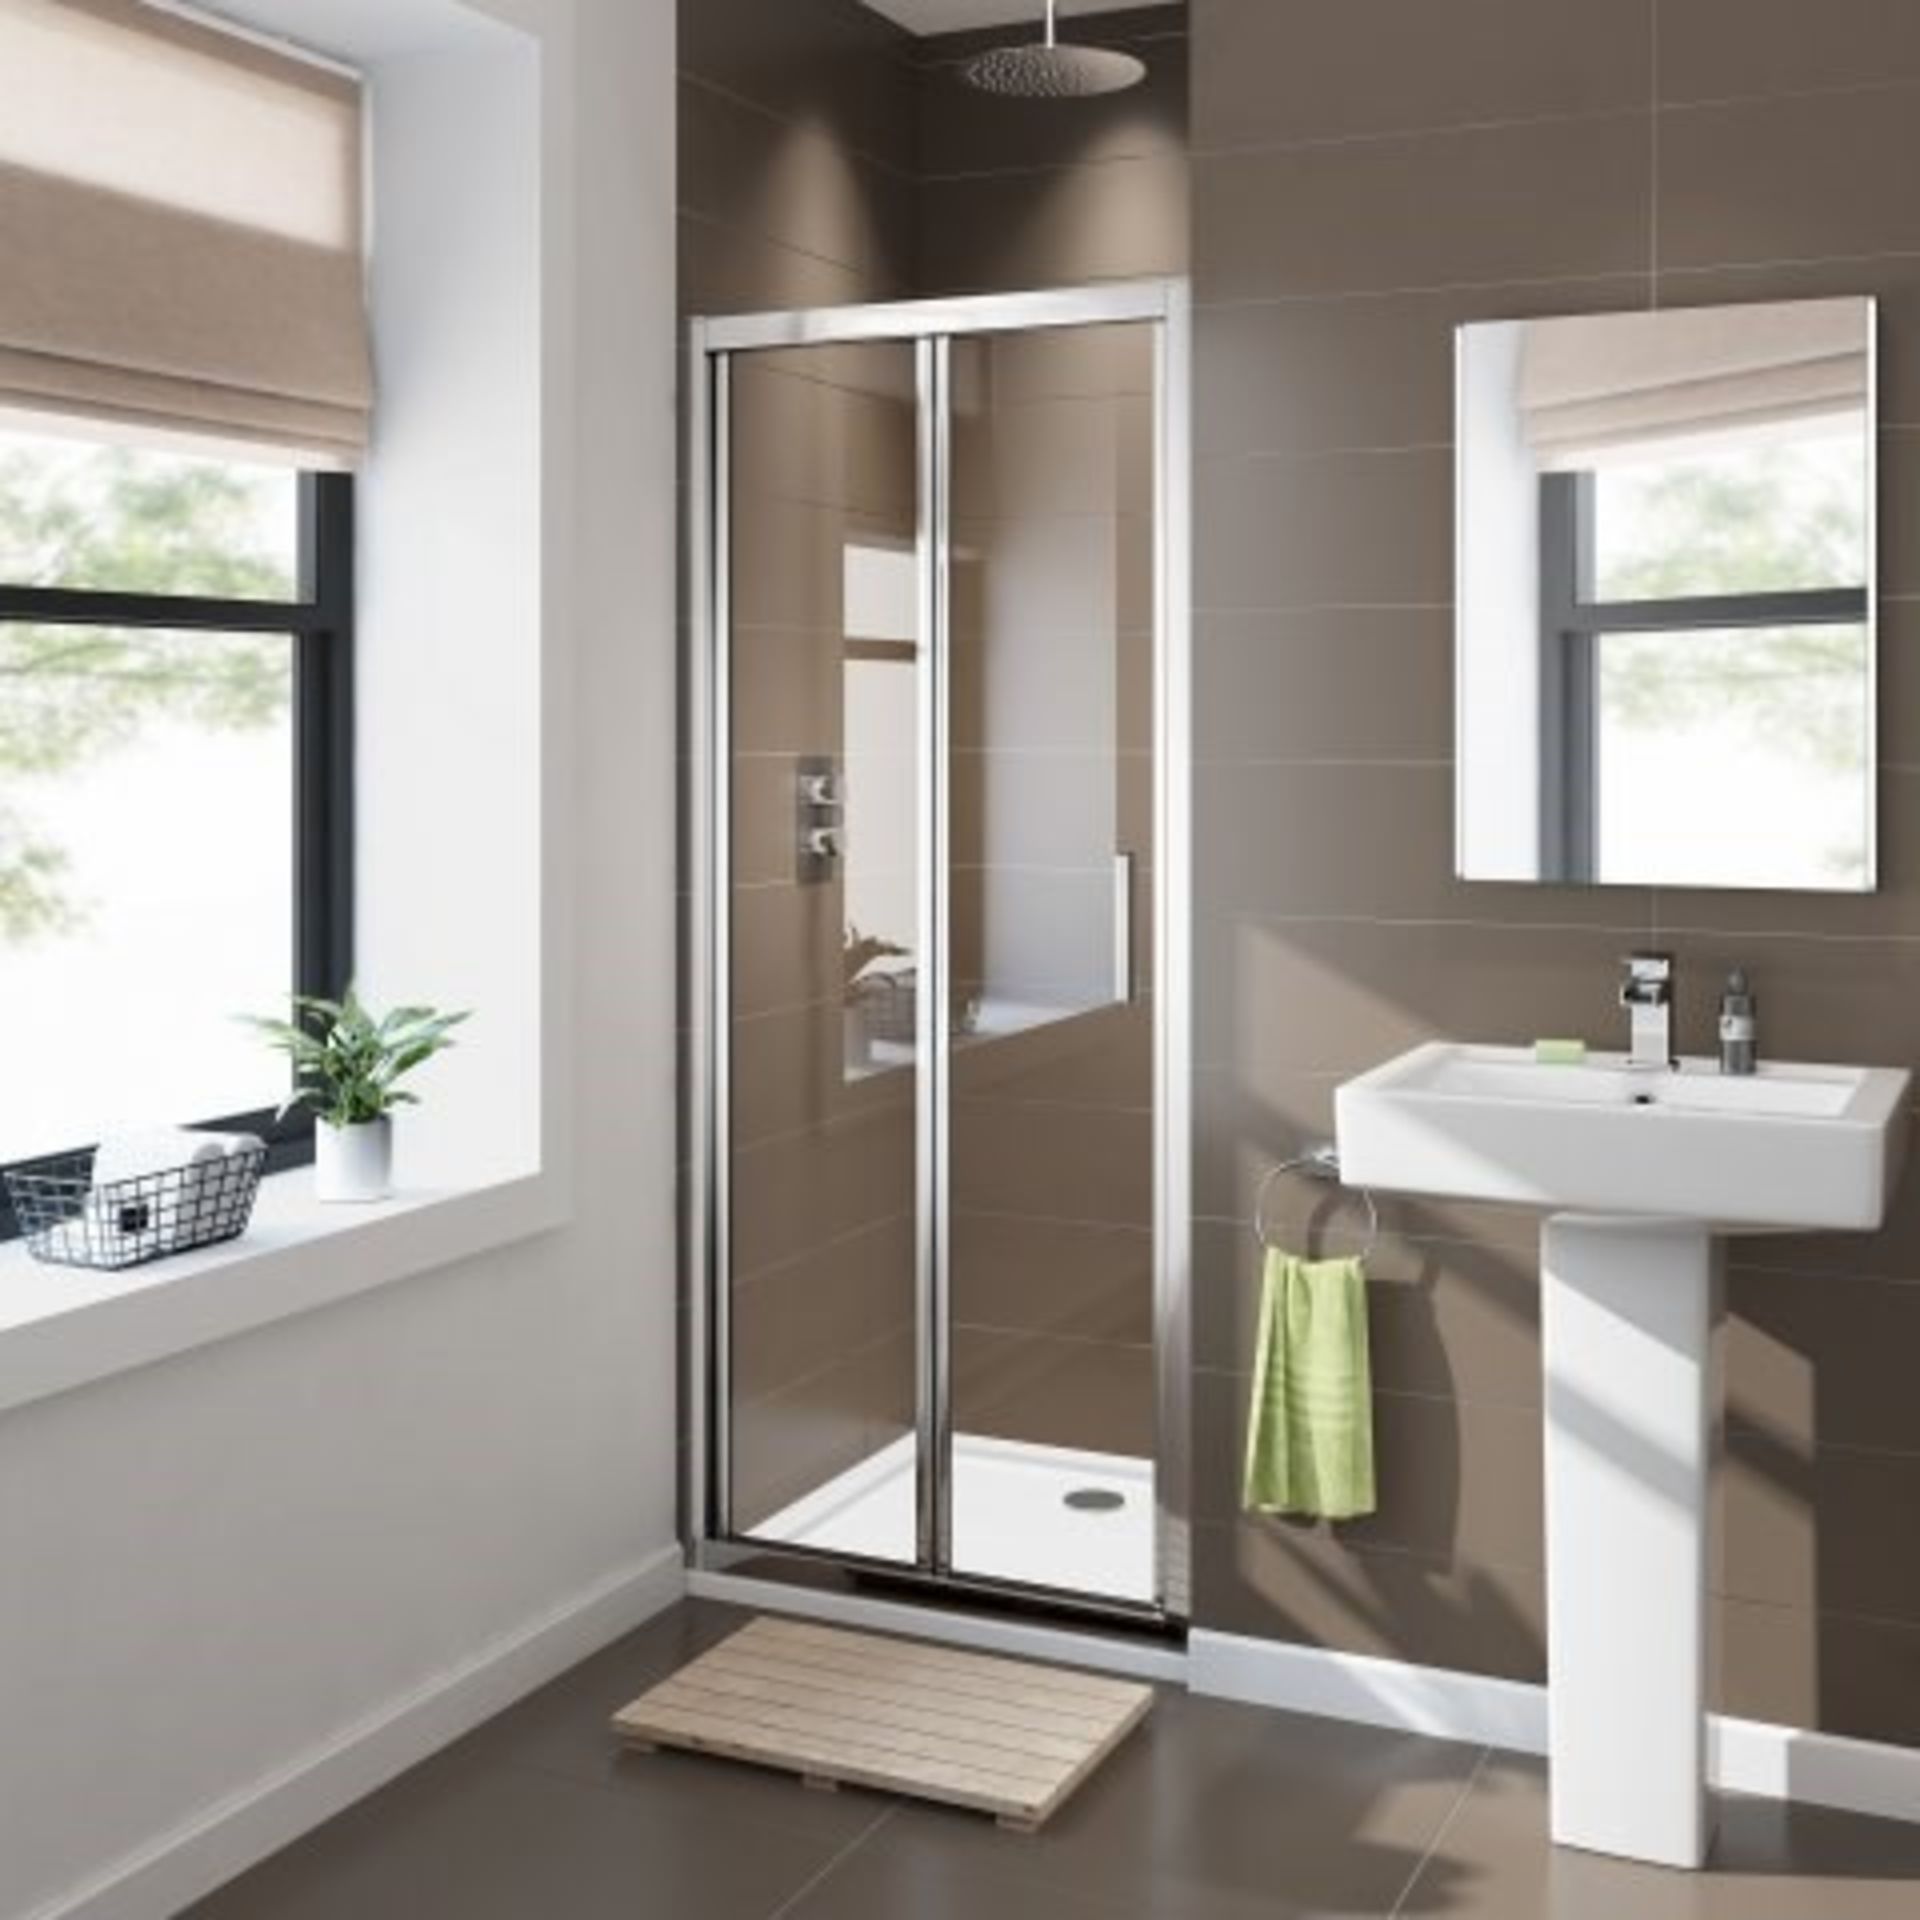 NEW 900mm - 8mm - Premium EasyClean Bifold Shower Door. RRP £379.99.Durability to withstand e... - Image 2 of 2